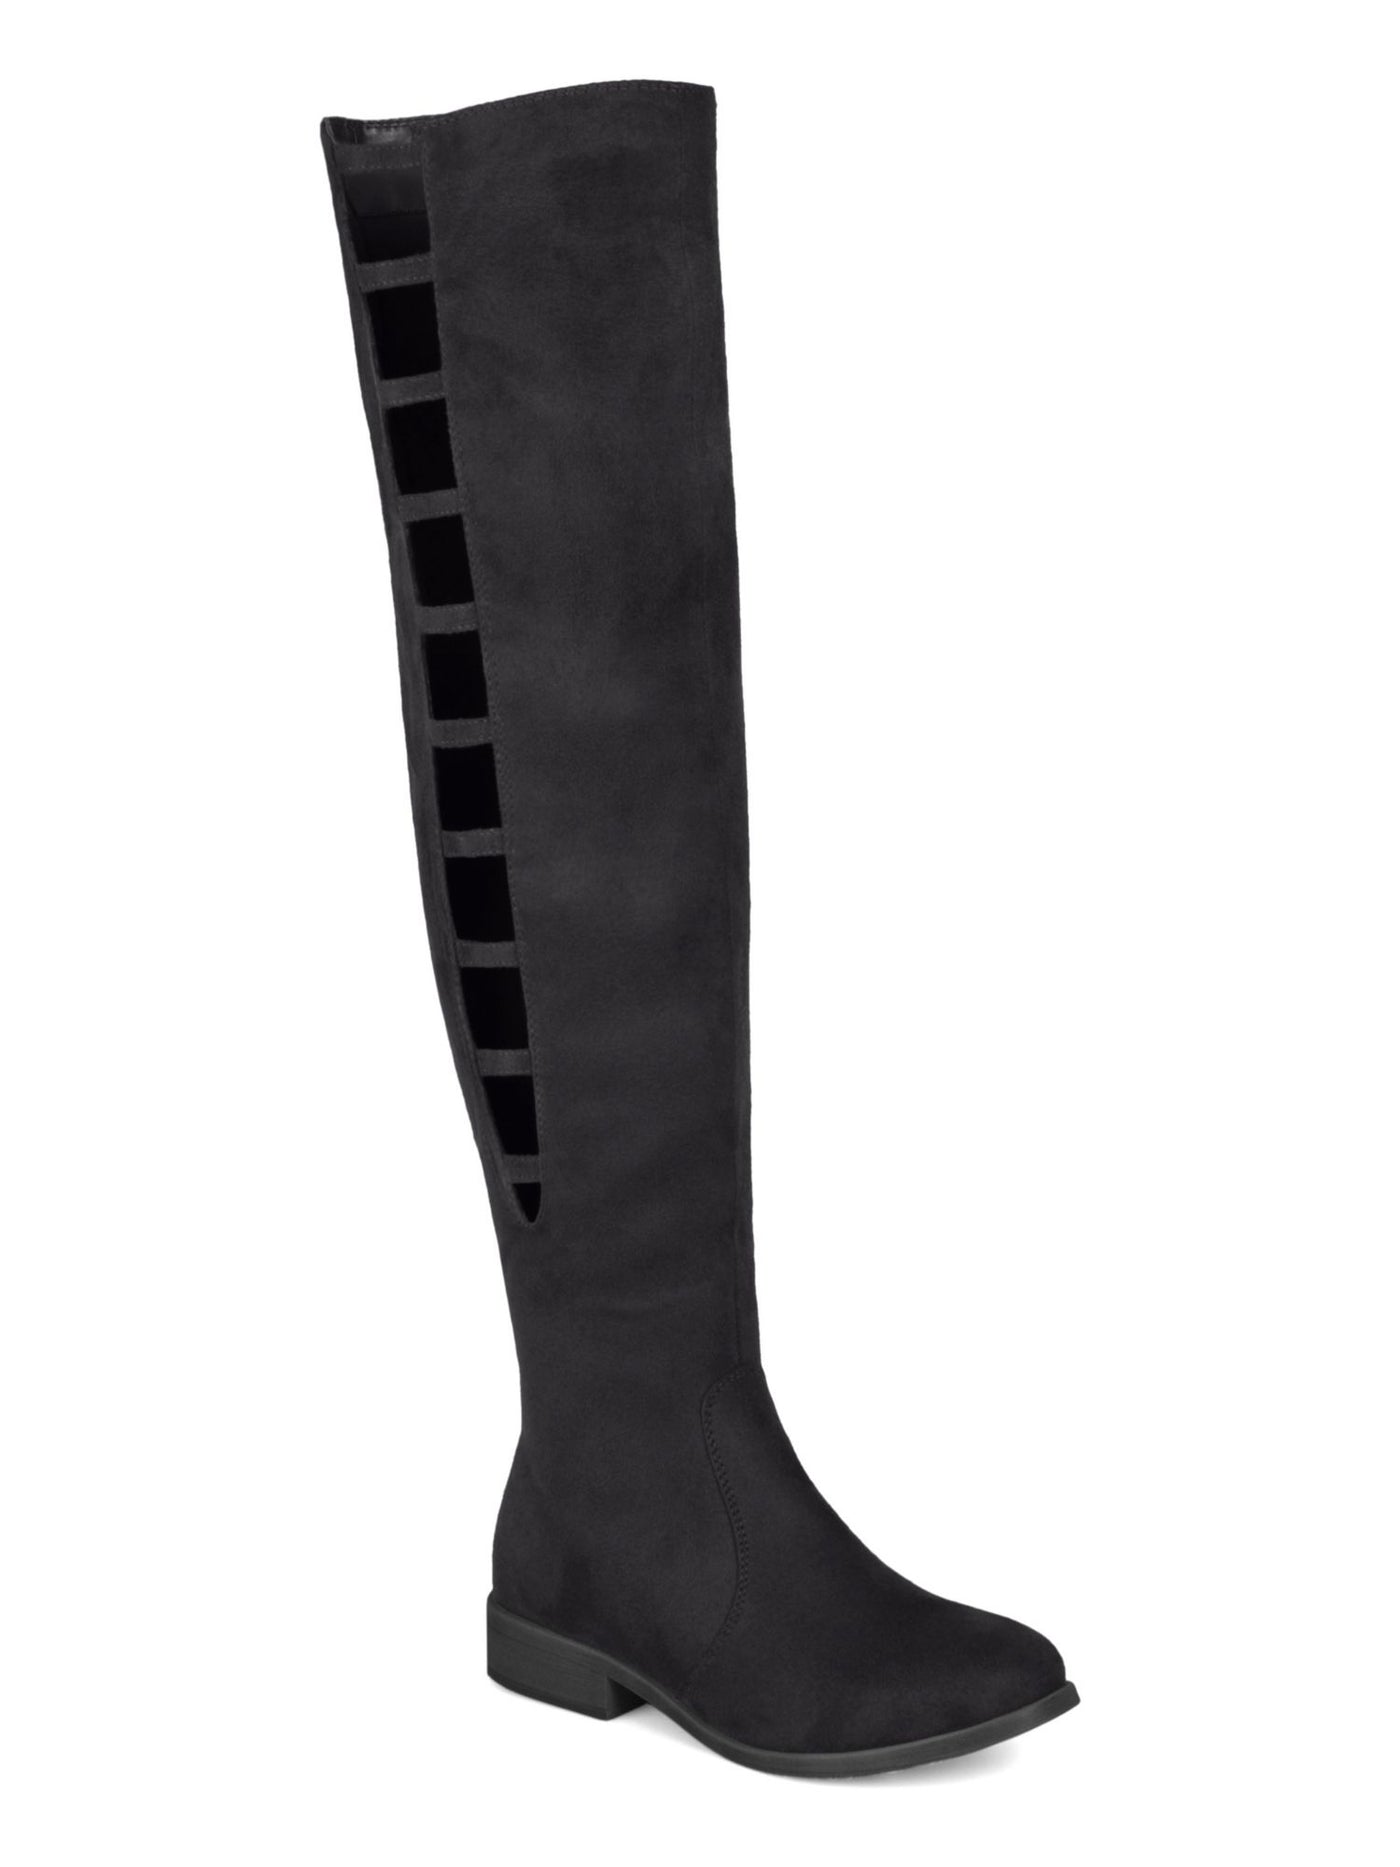 JOURNEE COLLECTION Womens Black Wide Calf Cushioned Pitch Round Toe Block Heel Zip-Up Dress Boots Shoes 6